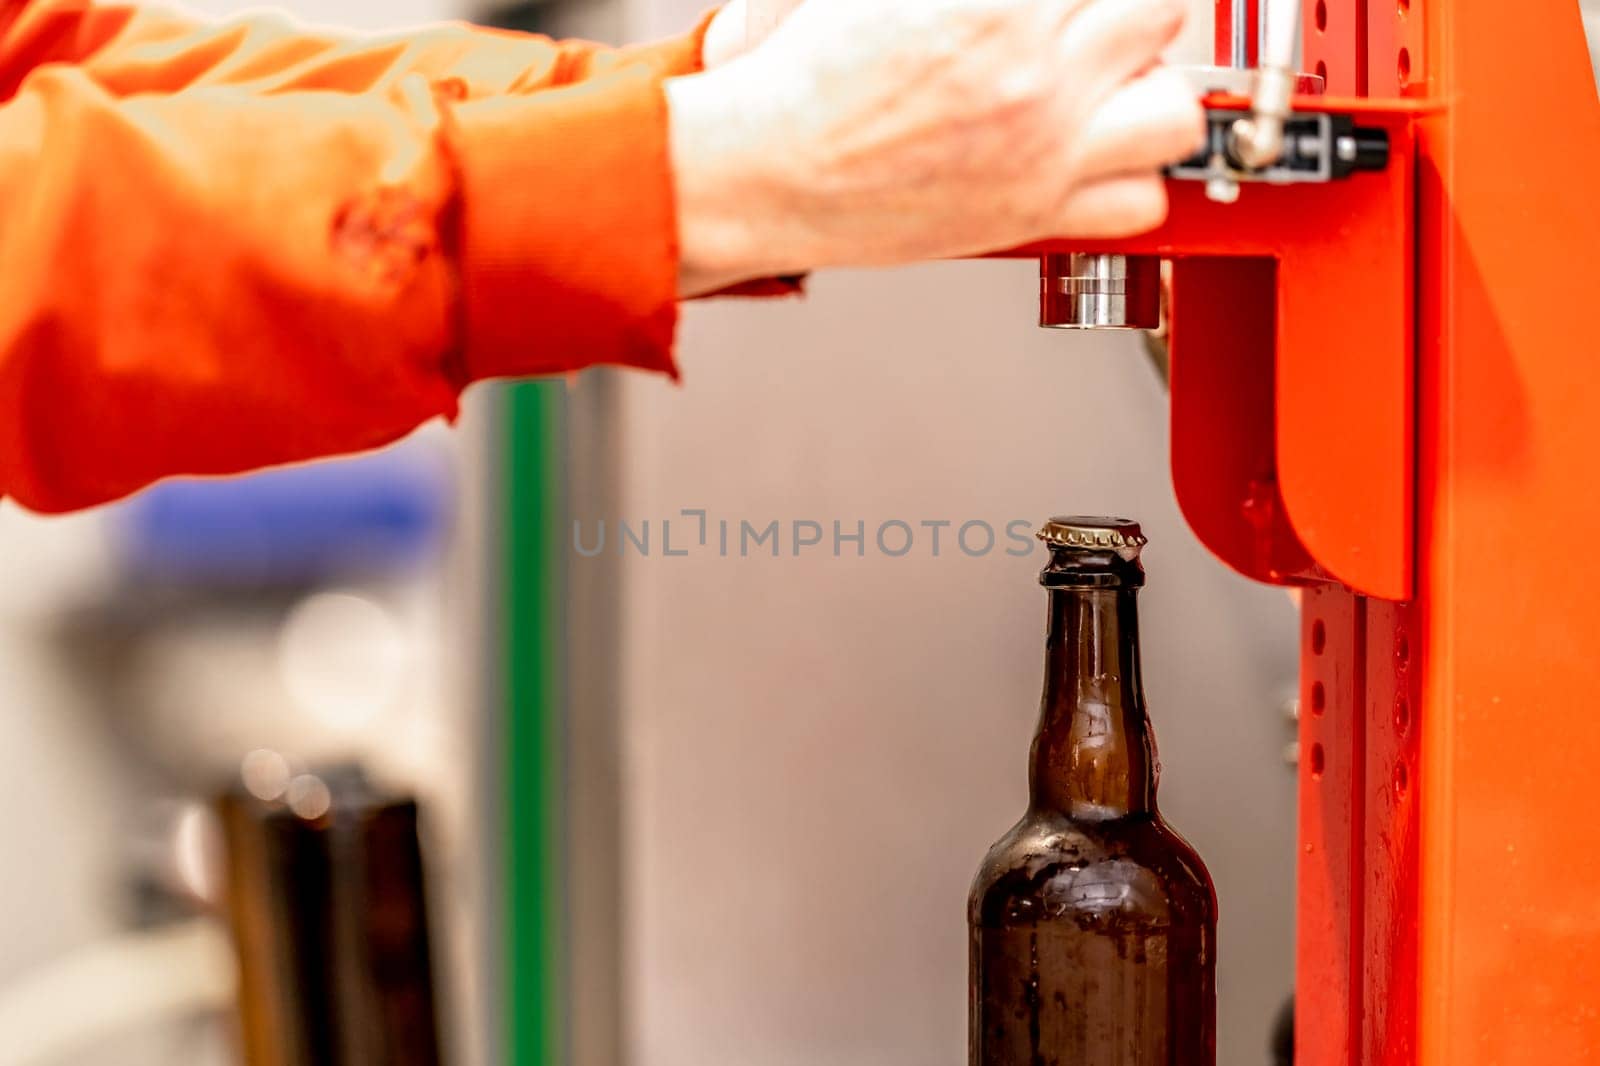 mechanical capping of beer bottles in the brewery by Edophoto